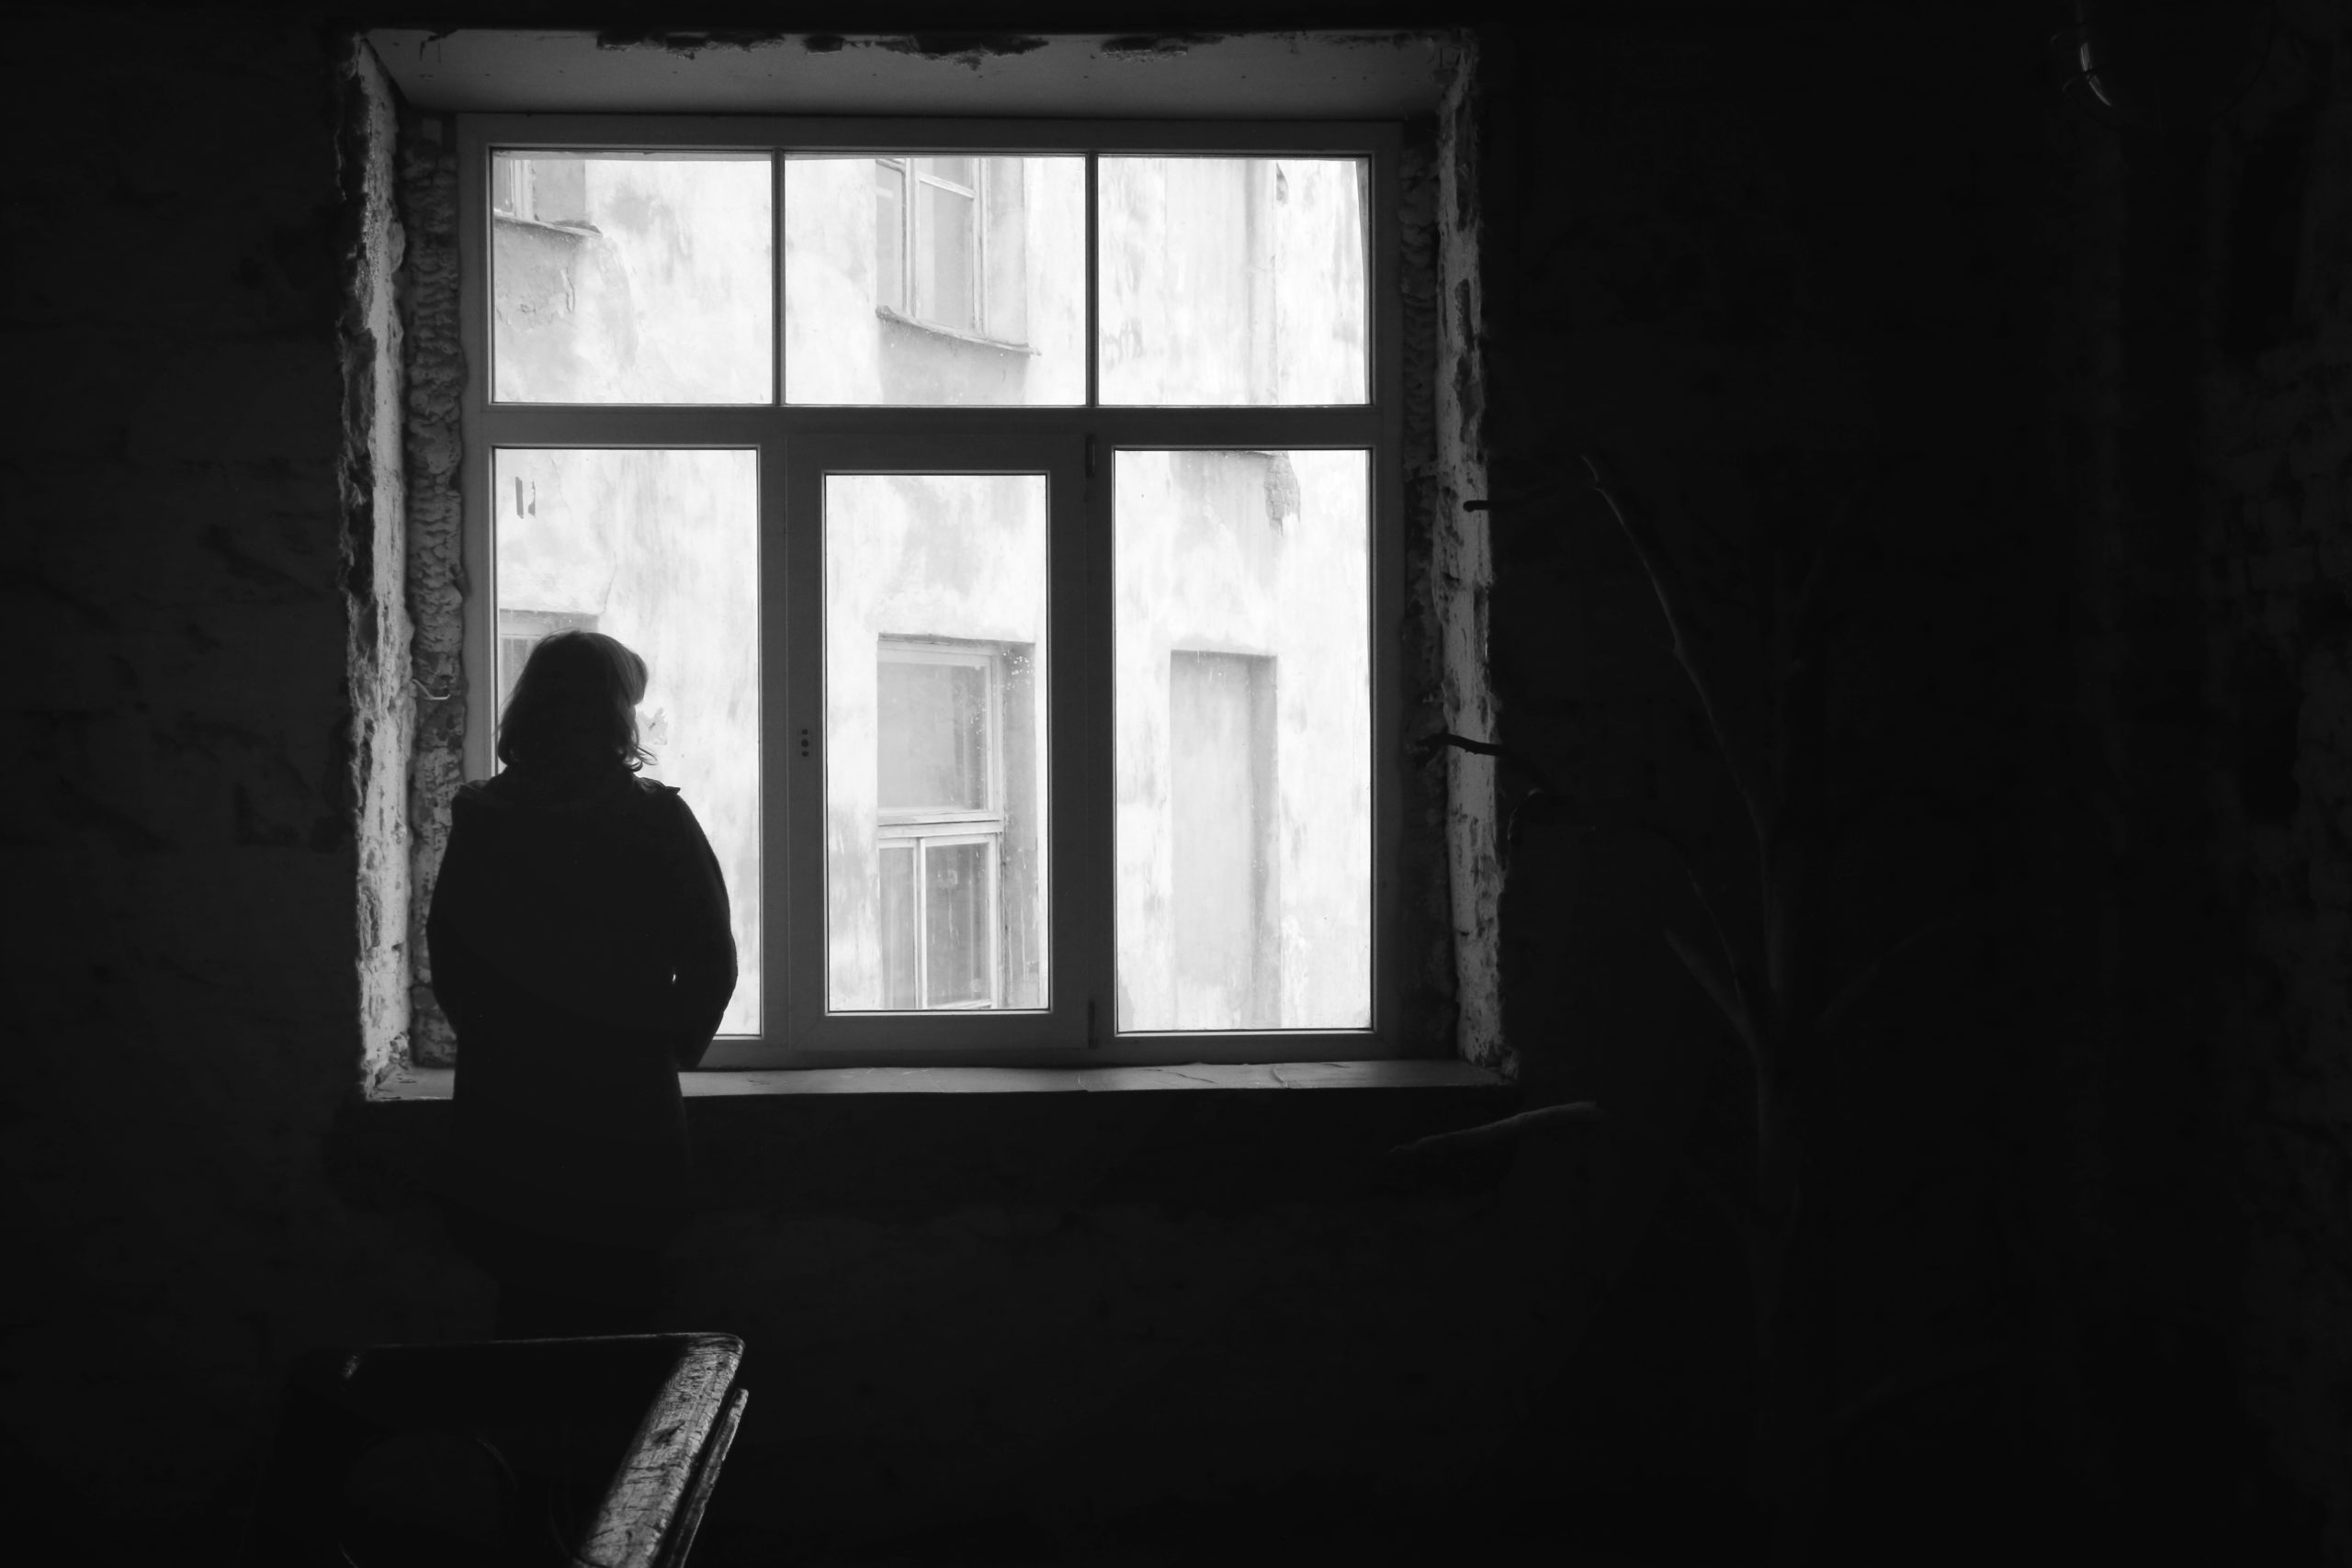 How can digital tools address loneliness?